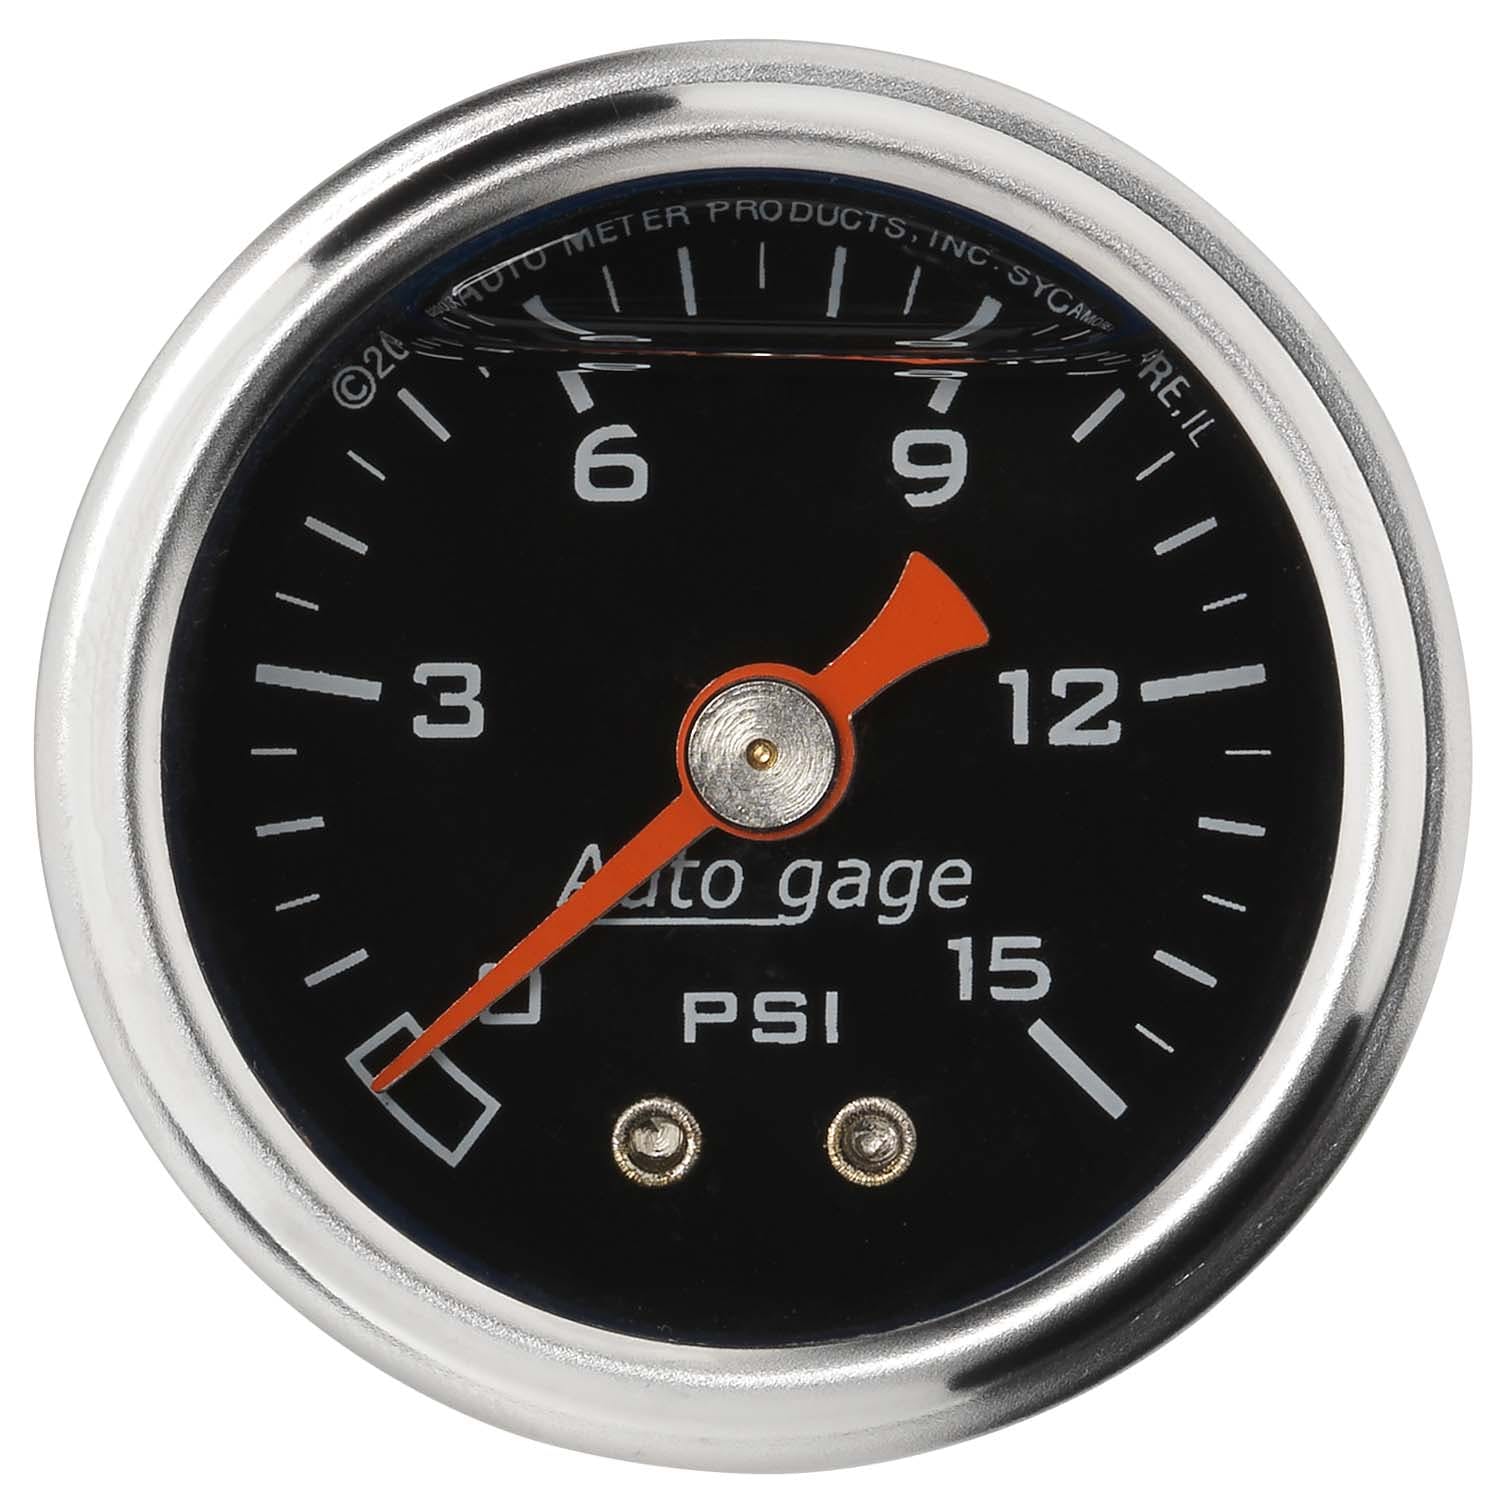 AutoMeter Products 2172 Auto Gage Series Dampened-Movement Pressure Gauge (Black, 0-15 PSI, 1-1/2 in.)